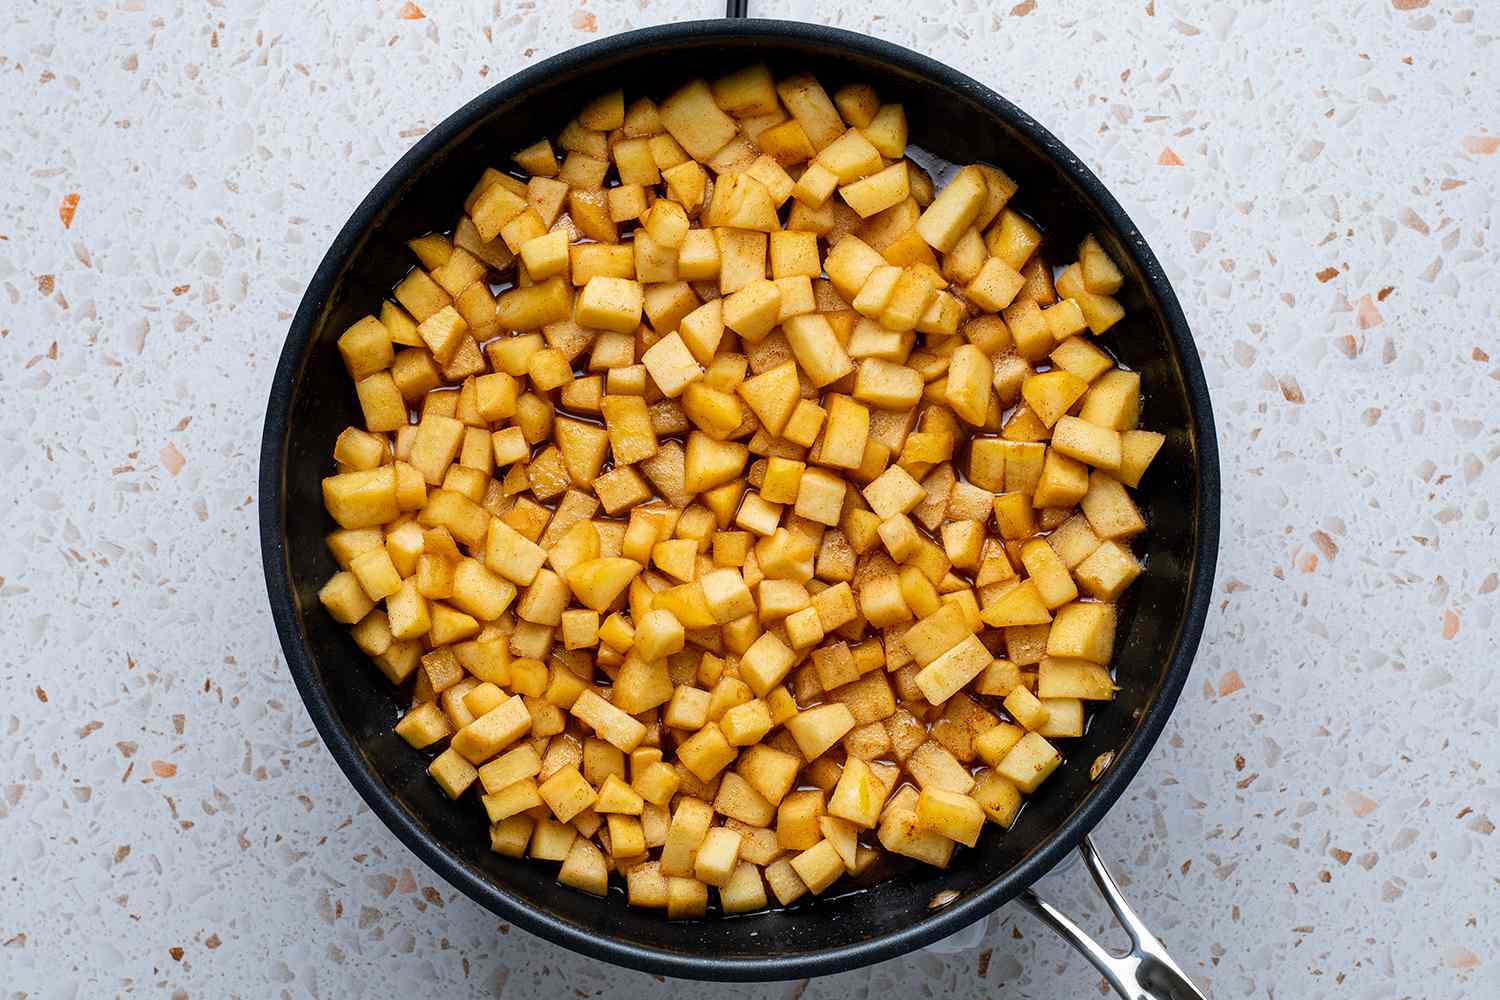 chopped apples cooking in a skillet